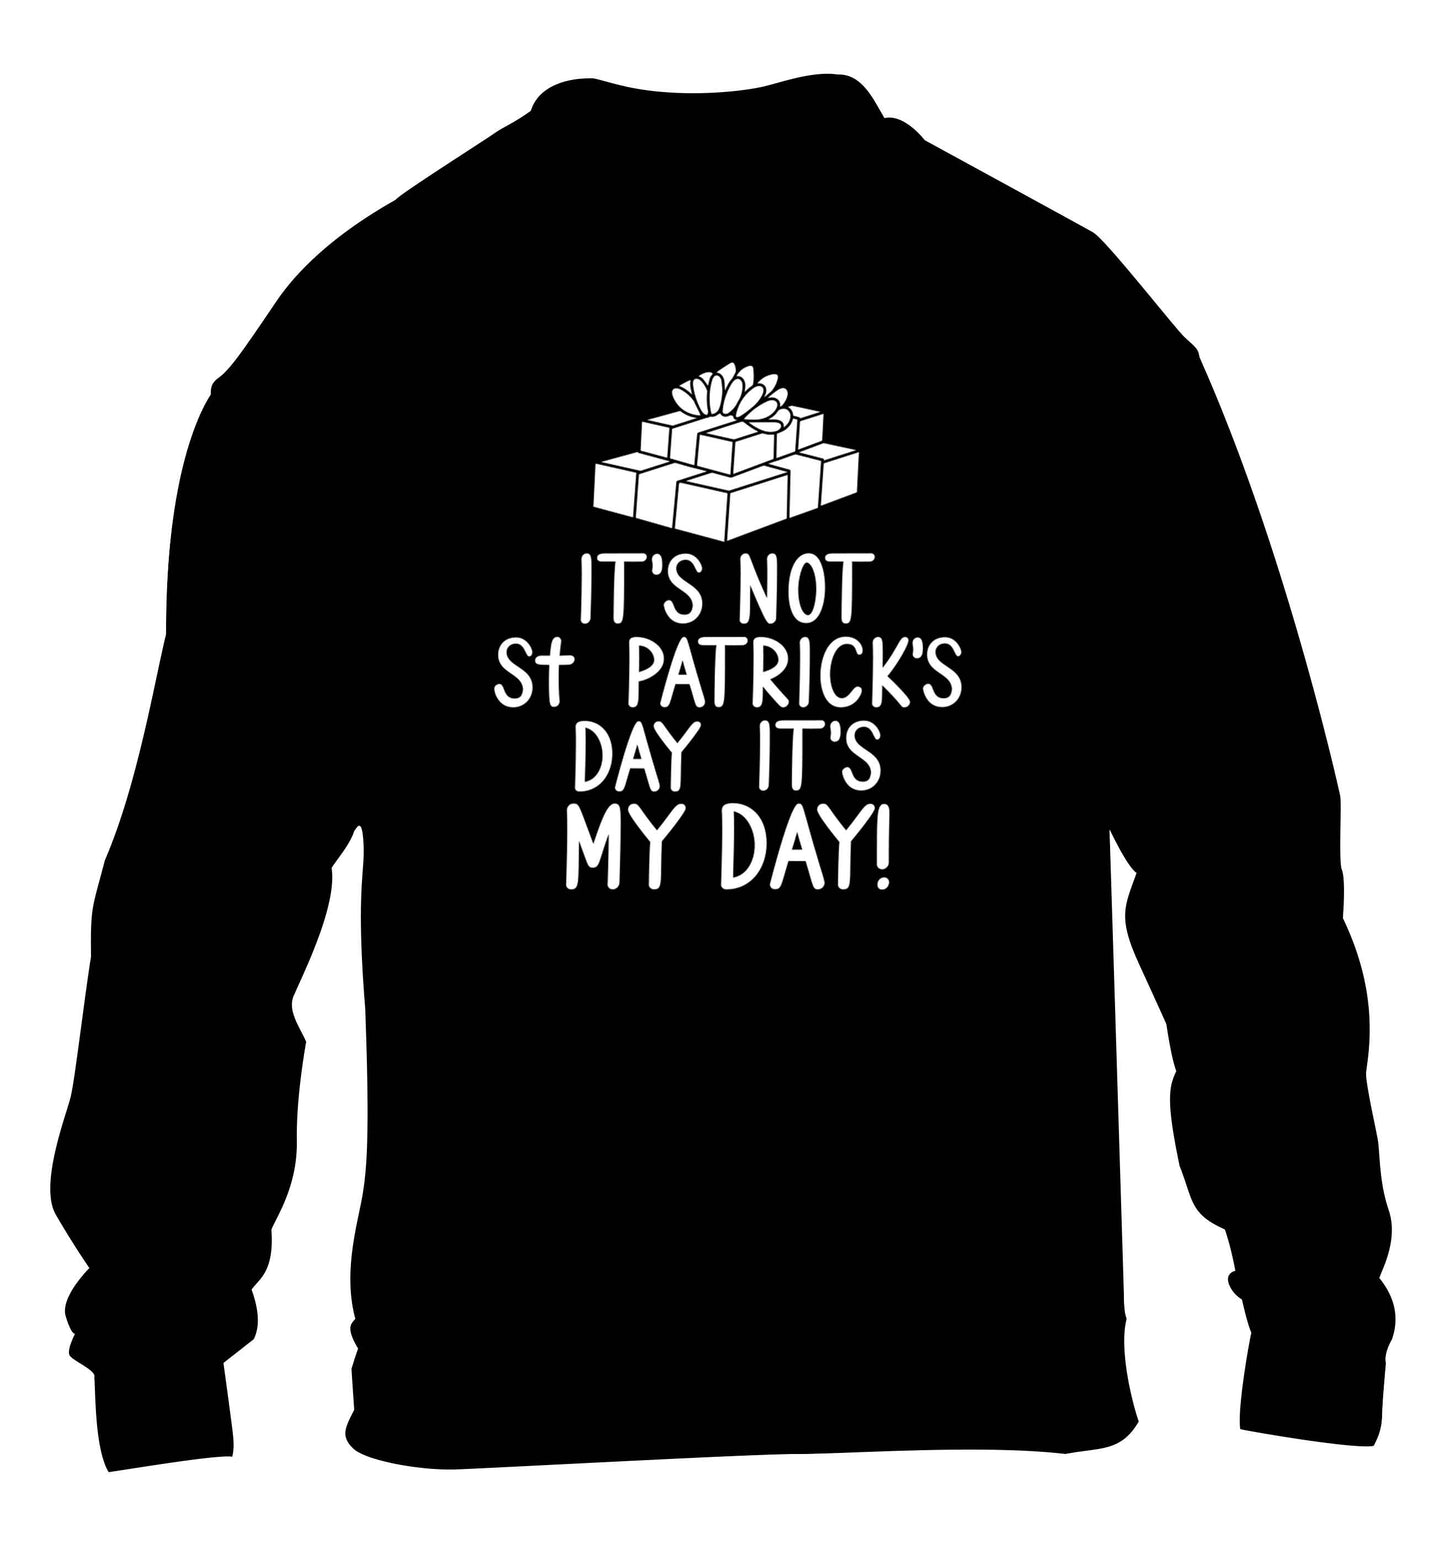 Funny gifts for your mum on mother's dayor her birthday! It's not St Patricks day it's my day children's black sweater 12-13 Years